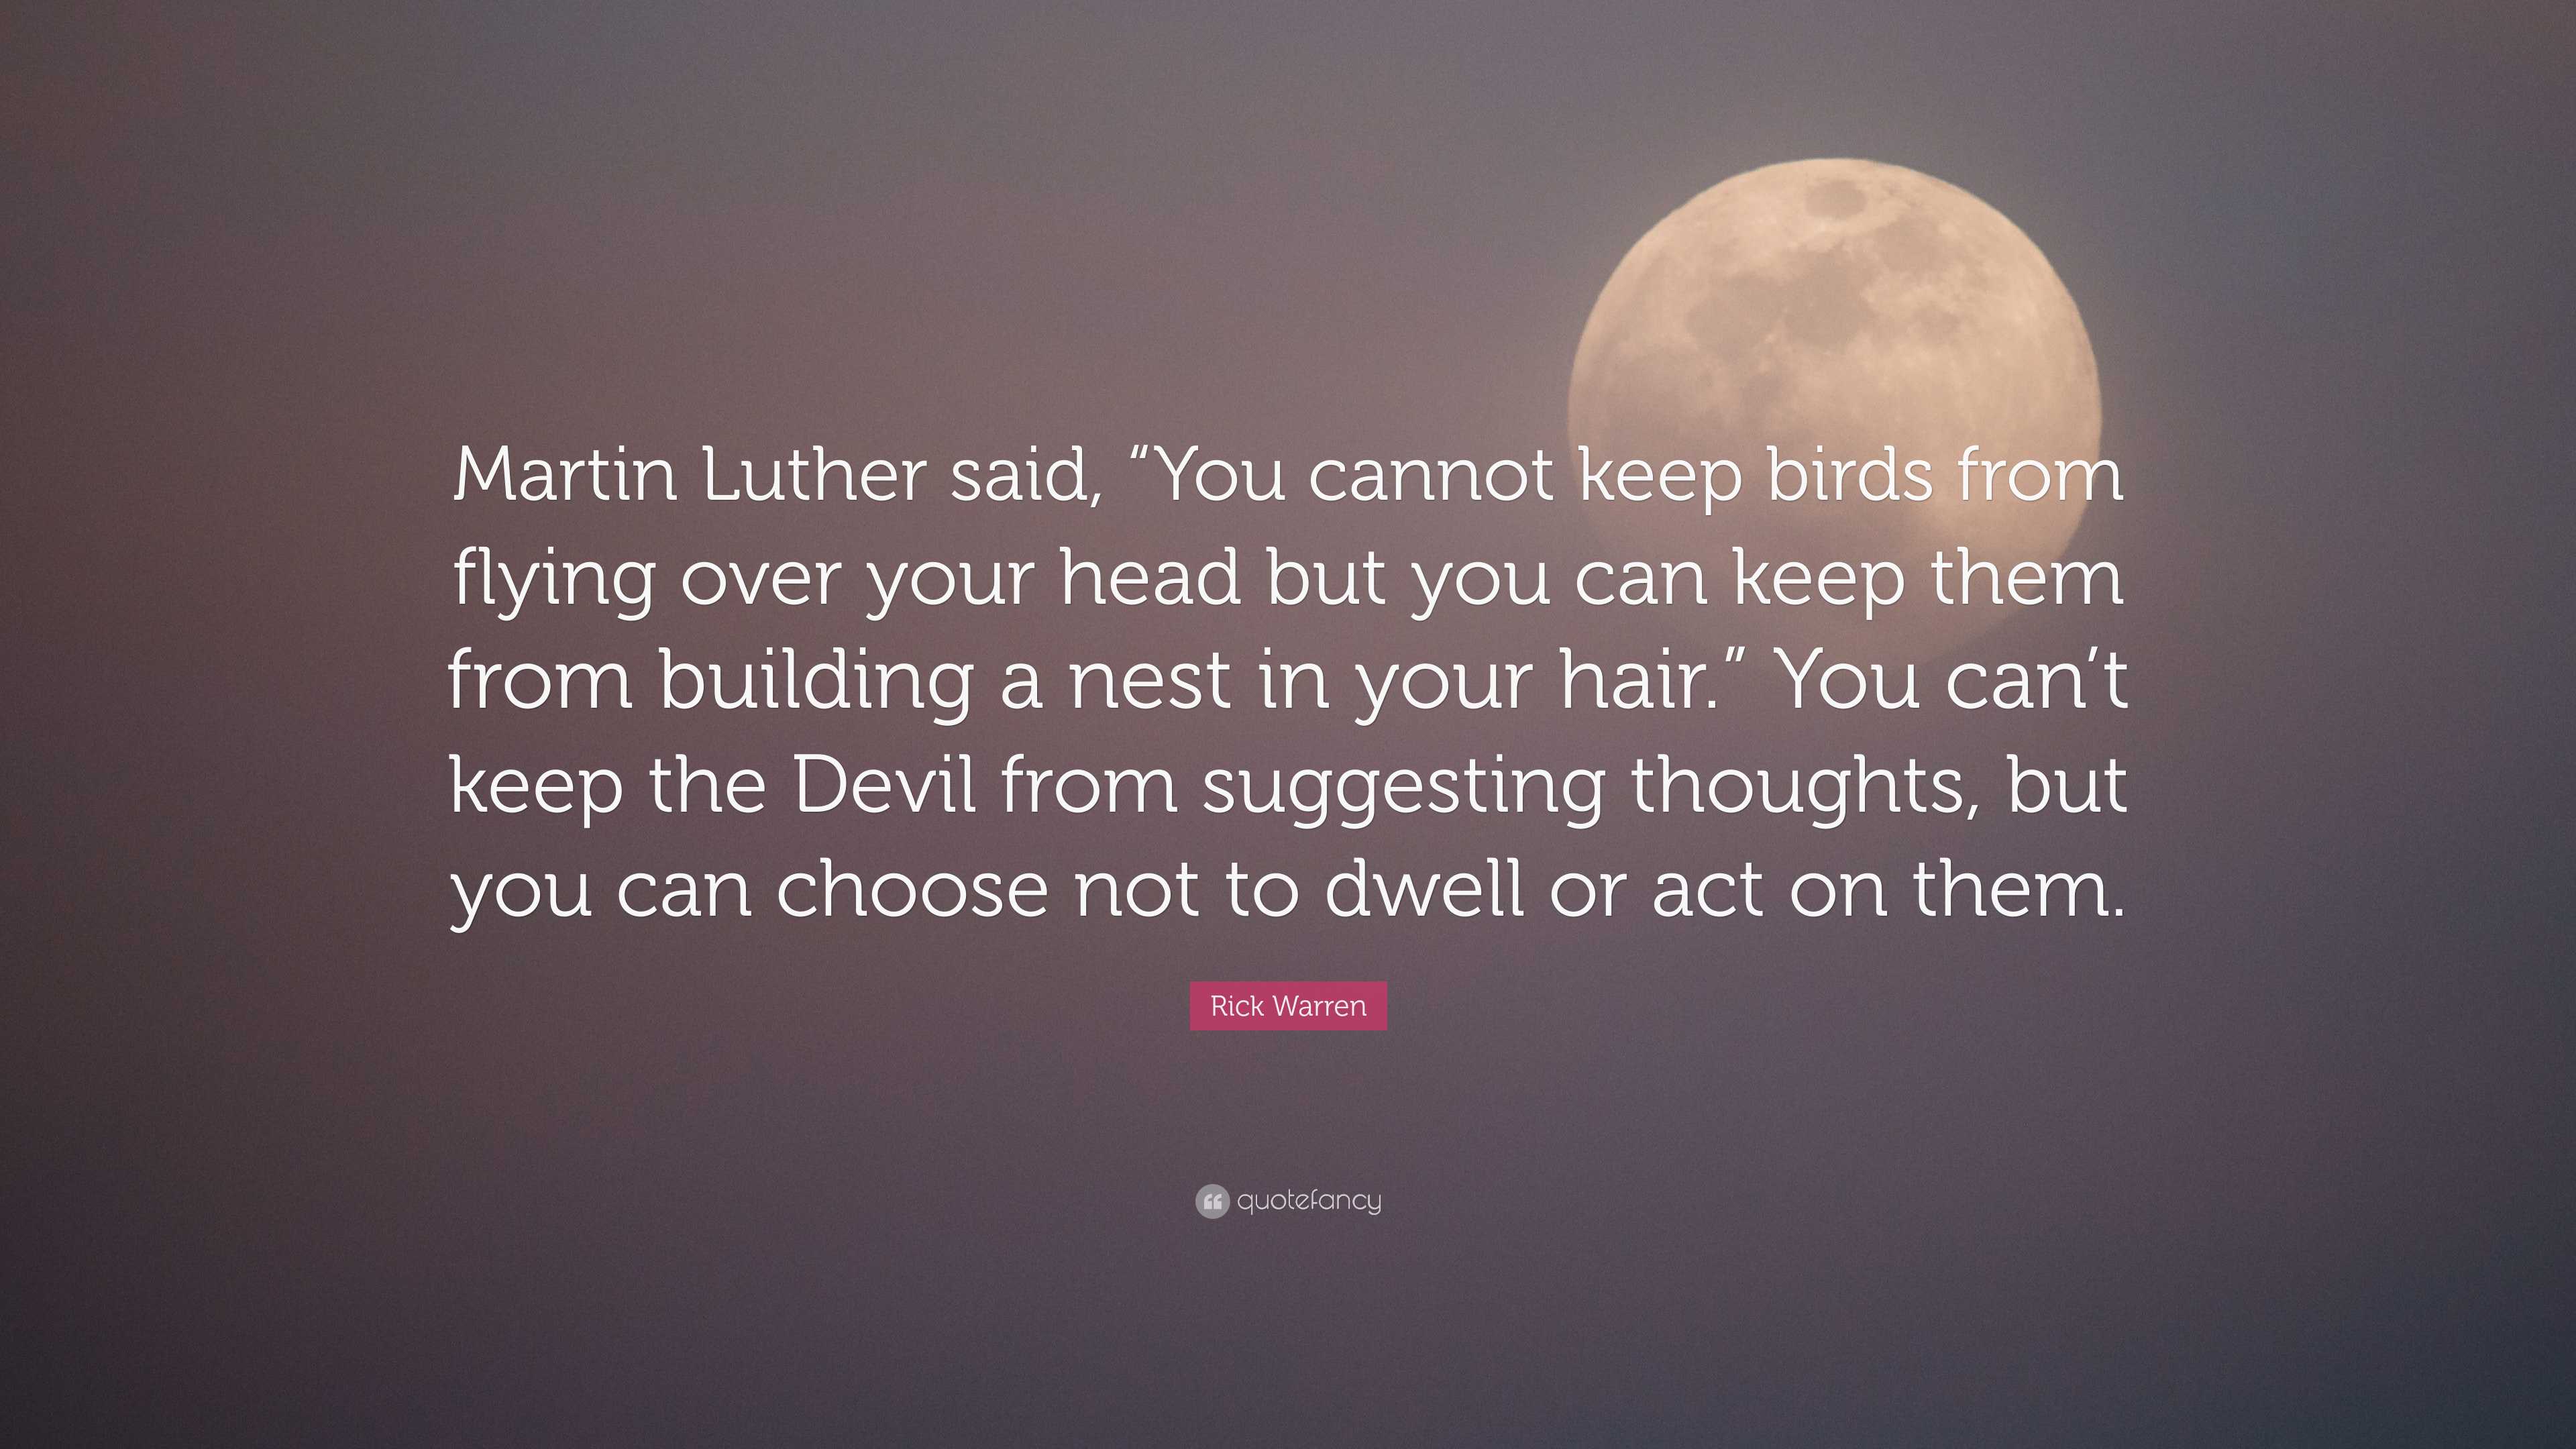 Rick Warren Quote: “Martin Luther said, “You cannot keep birds from ...